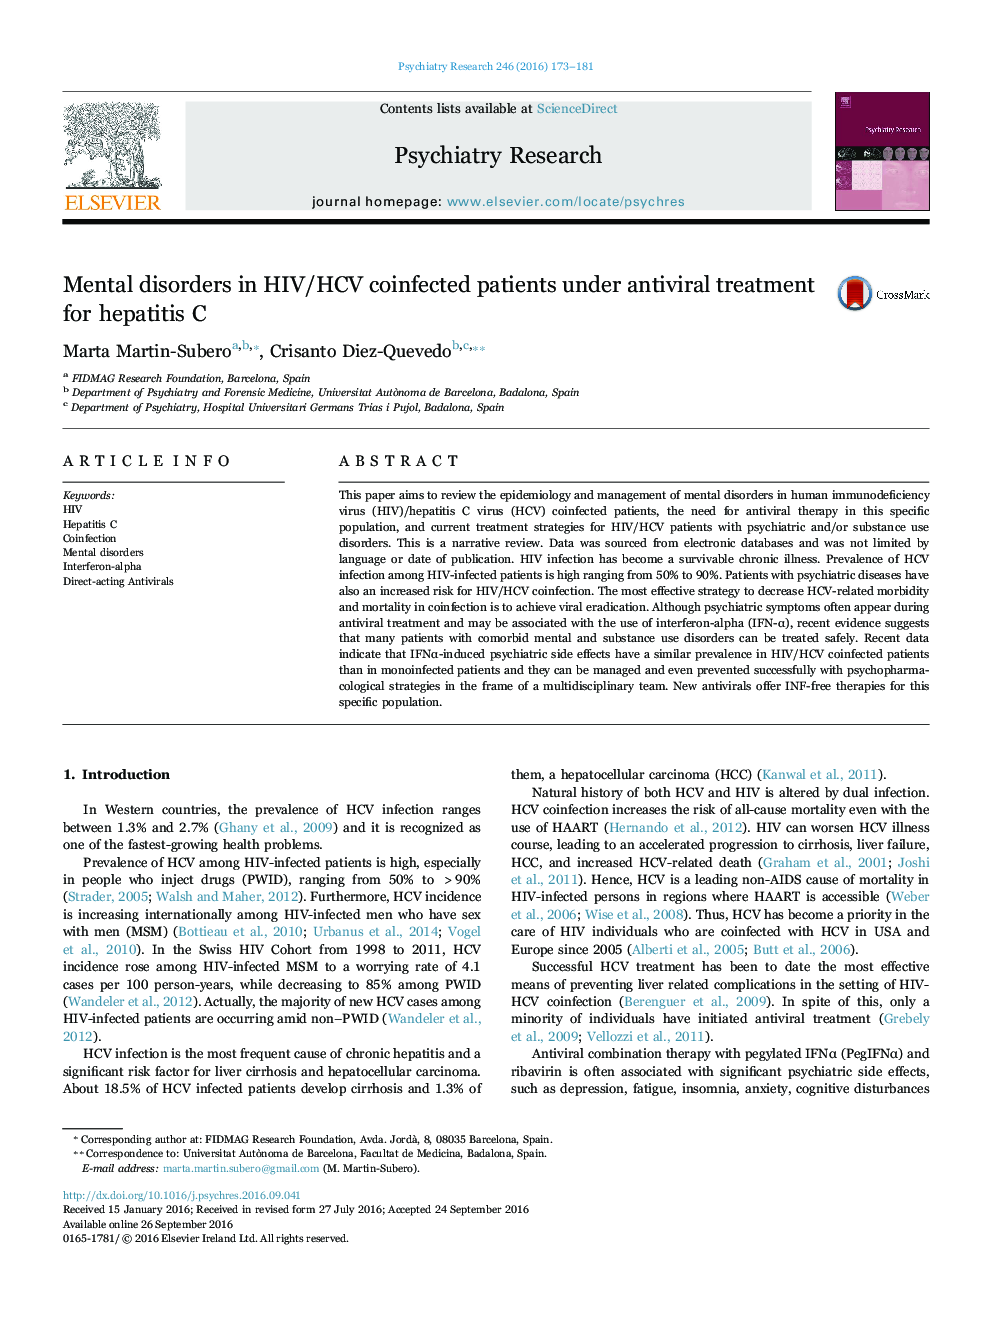 Mental disorders in HIV/HCV coinfected patients under antiviral treatment for hepatitis C